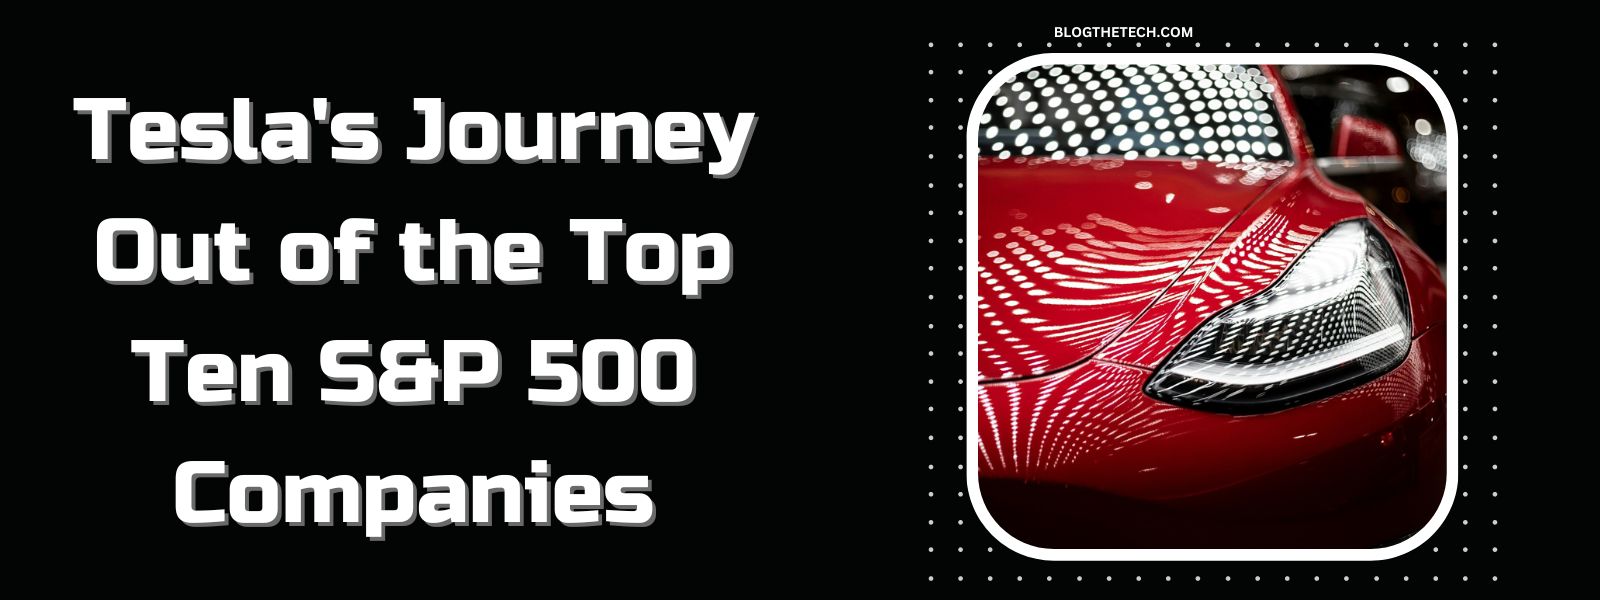 Tesla's Journey Out of the Top Ten S&P 500 Companies